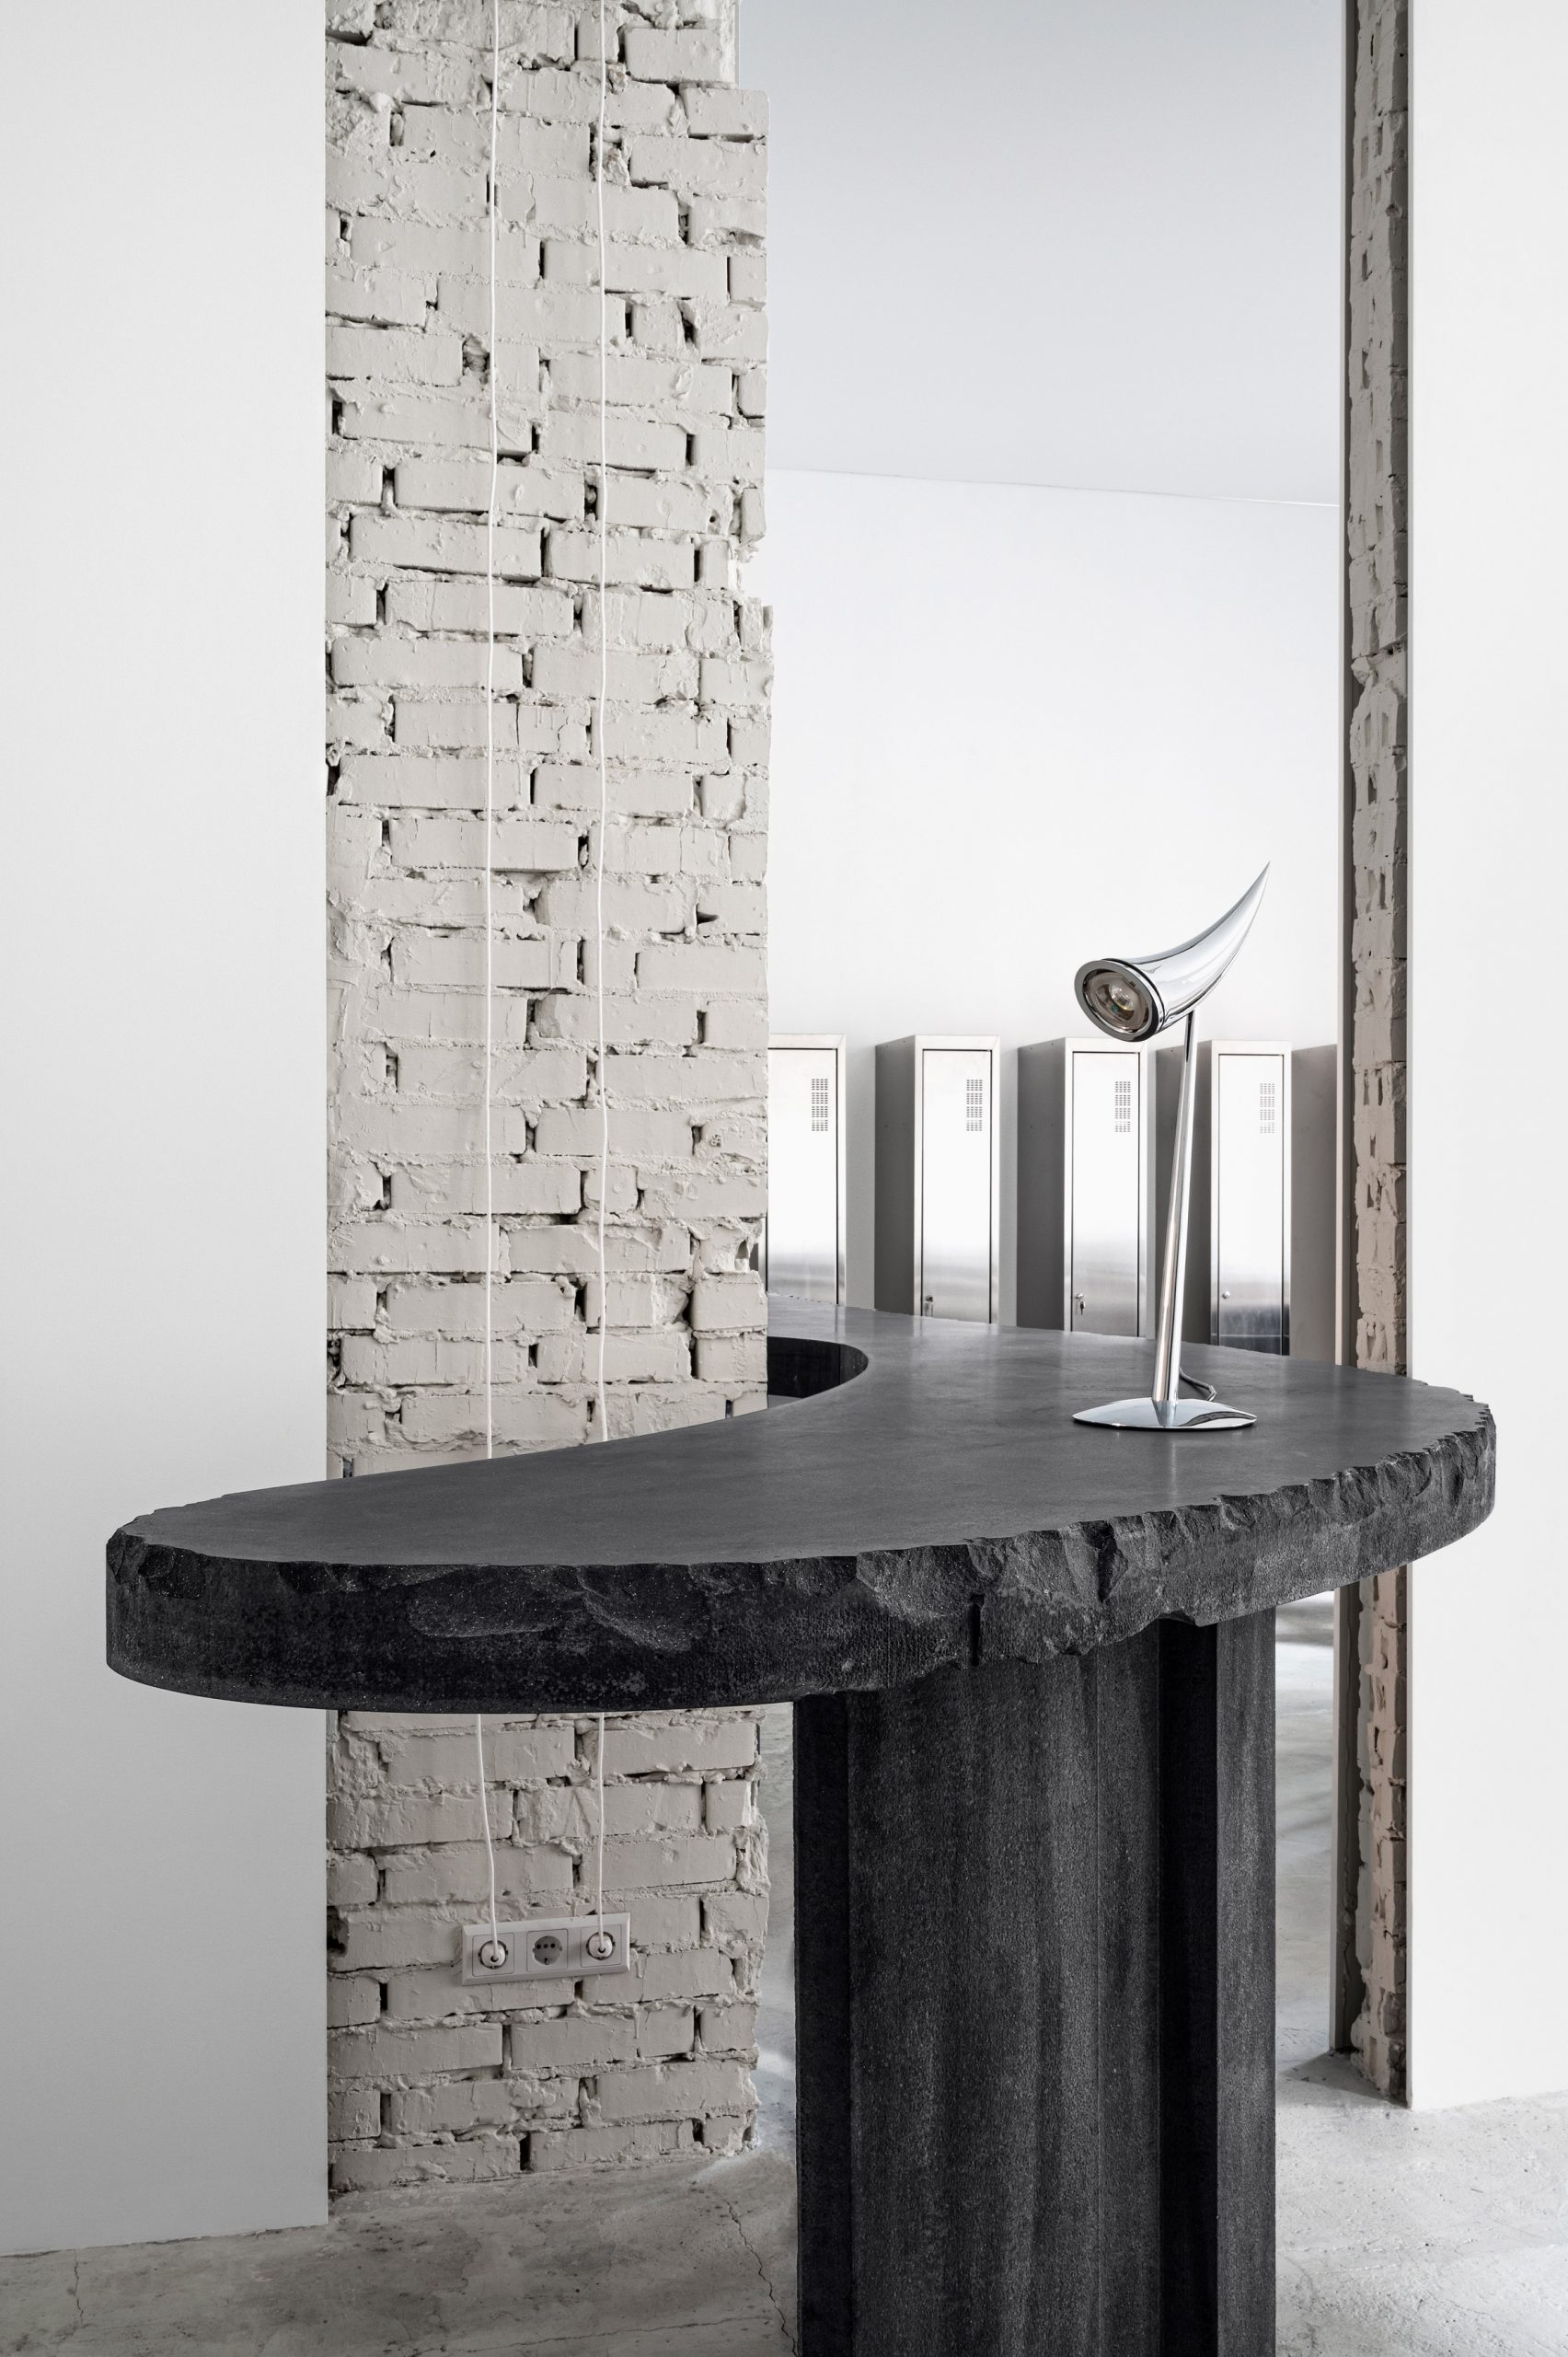 Curved concrete table with chrome light in 6:19 Studio